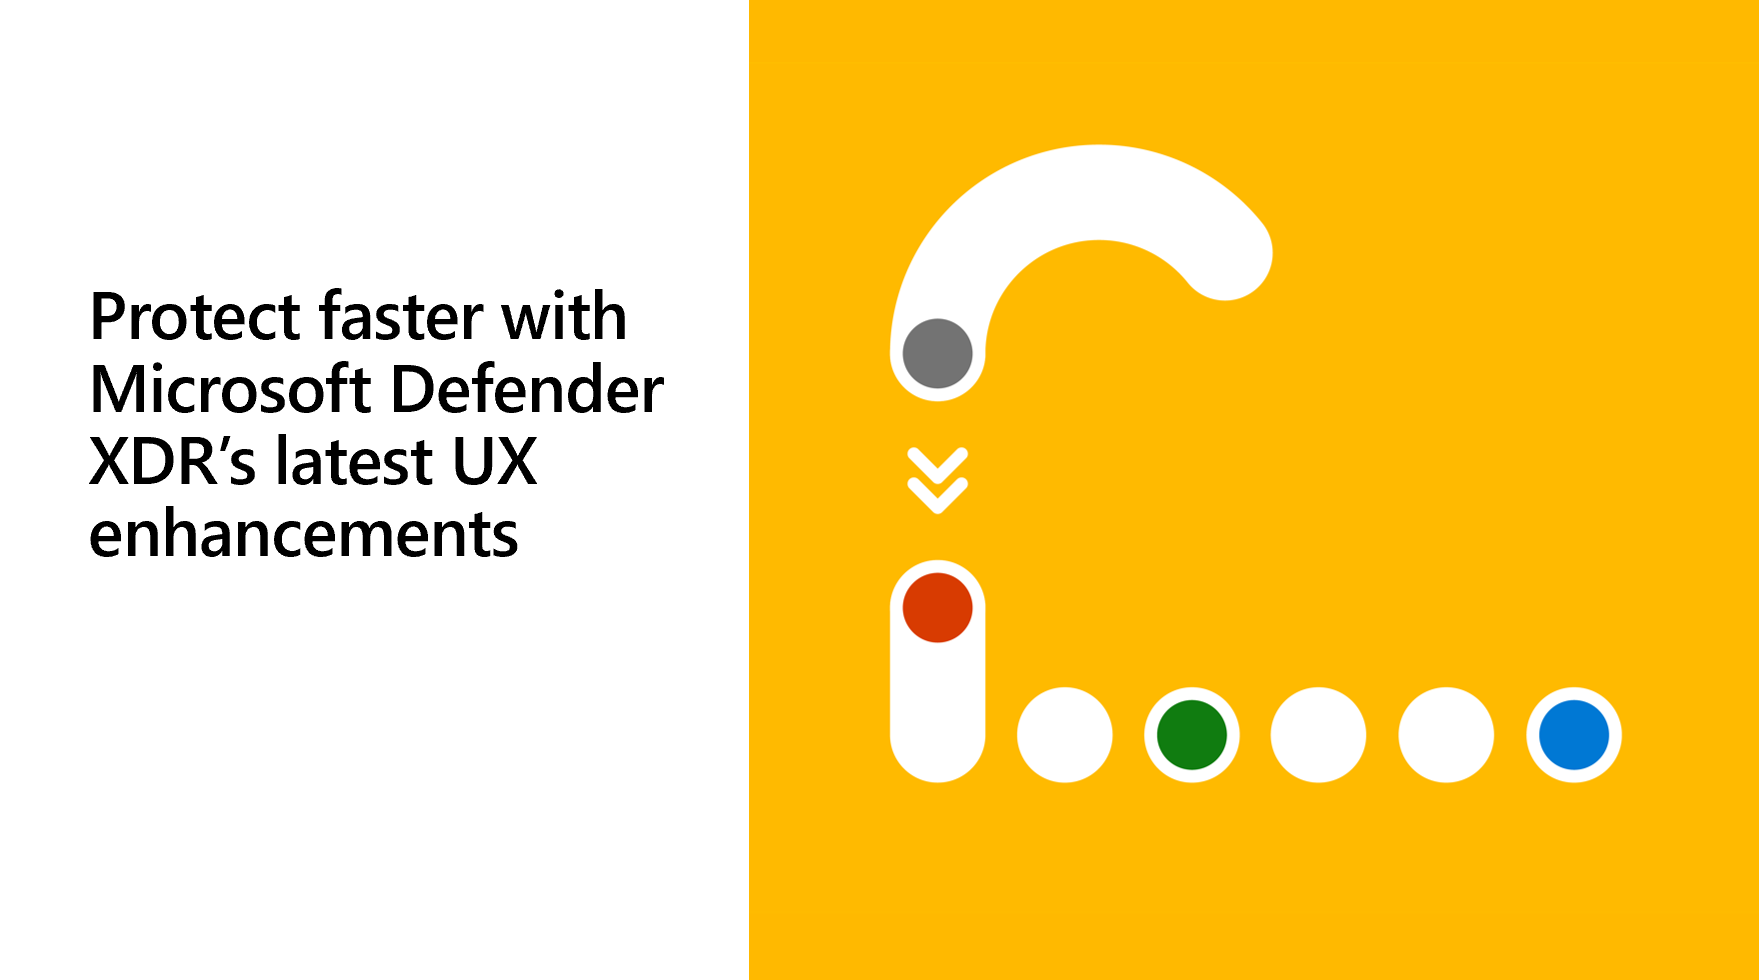 Protect faster with Microsoft Defender XDR’s latest UX enhancements